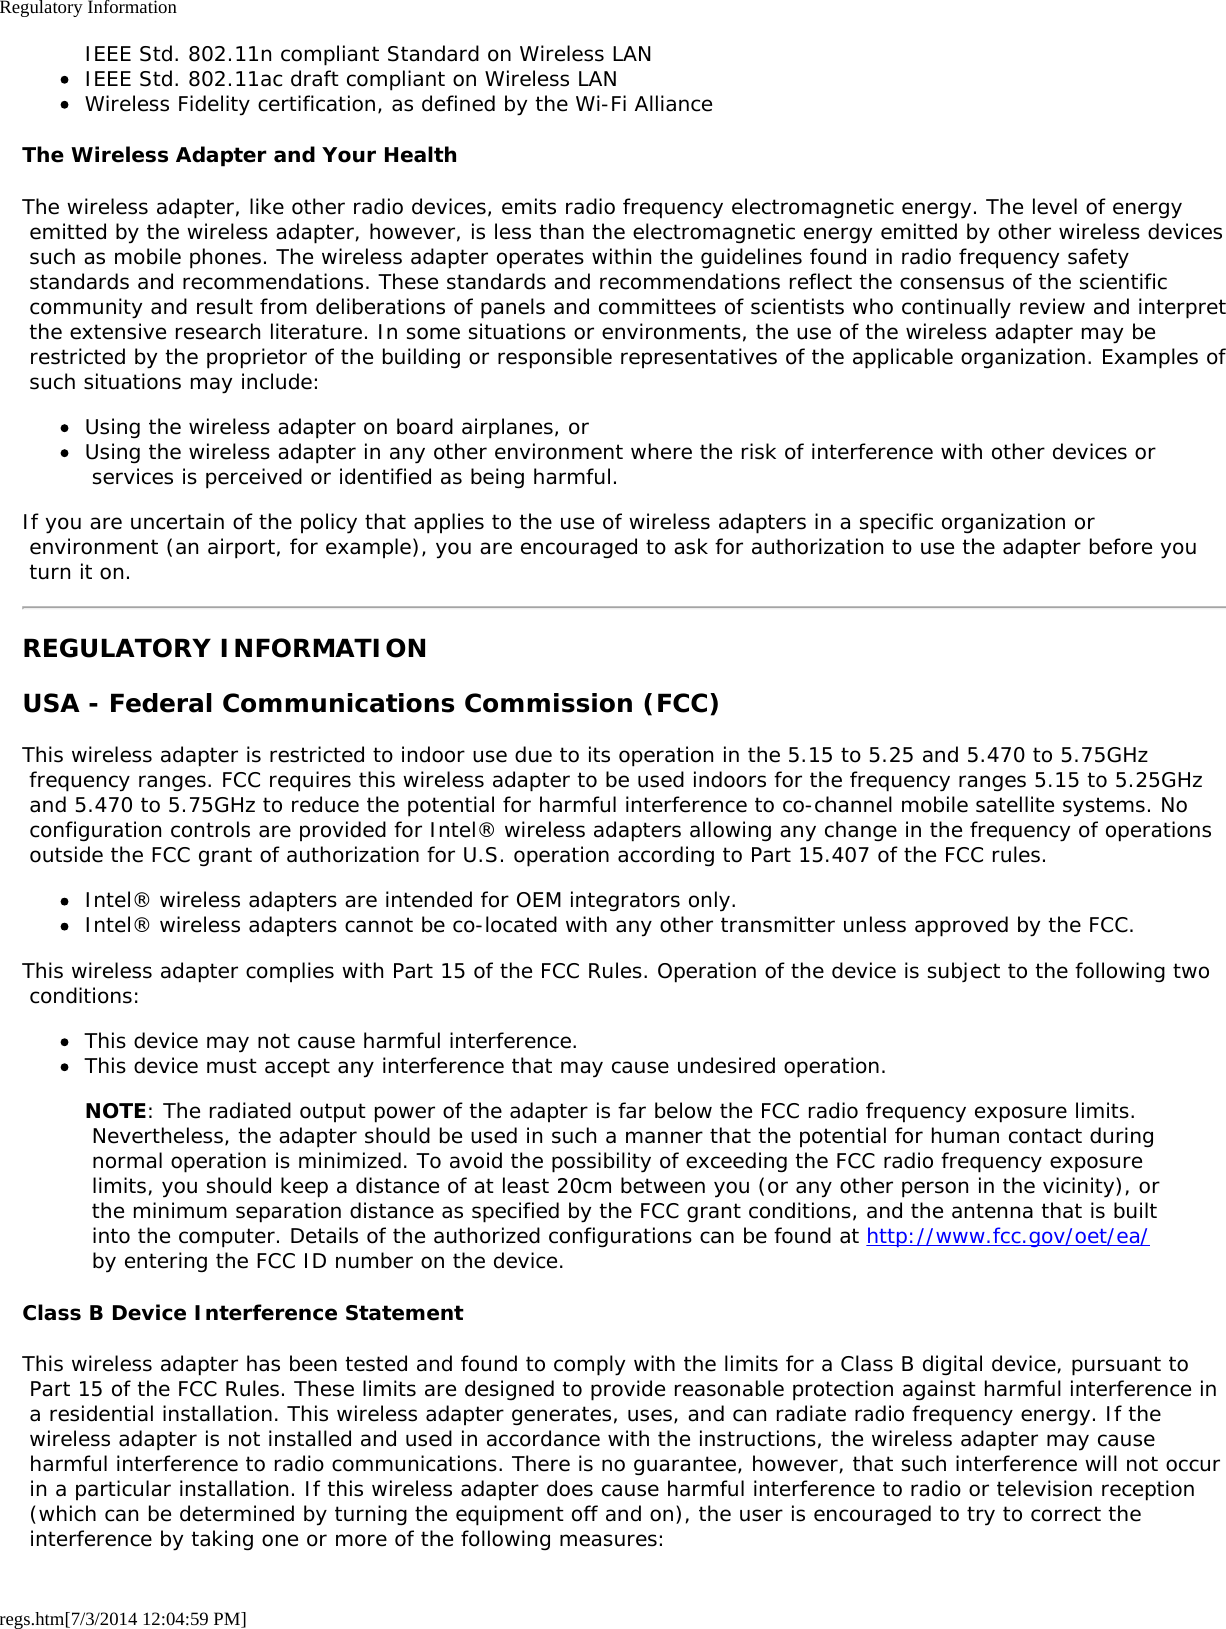 Regulatory Informationregs.htm[7/3/2014 12:04:59 PM]IEEE Std. 802.11n compliant Standard on Wireless LANIEEE Std. 802.11ac draft compliant on Wireless LANWireless Fidelity certification, as defined by the Wi-Fi AllianceThe Wireless Adapter and Your HealthThe wireless adapter, like other radio devices, emits radio frequency electromagnetic energy. The level of energy emitted by the wireless adapter, however, is less than the electromagnetic energy emitted by other wireless devices such as mobile phones. The wireless adapter operates within the guidelines found in radio frequency safety standards and recommendations. These standards and recommendations reflect the consensus of the scientific community and result from deliberations of panels and committees of scientists who continually review and interpret the extensive research literature. In some situations or environments, the use of the wireless adapter may be restricted by the proprietor of the building or responsible representatives of the applicable organization. Examples of such situations may include:Using the wireless adapter on board airplanes, orUsing the wireless adapter in any other environment where the risk of interference with other devices or services is perceived or identified as being harmful.If you are uncertain of the policy that applies to the use of wireless adapters in a specific organization or environment (an airport, for example), you are encouraged to ask for authorization to use the adapter before you turn it on.REGULATORY INFORMATIONUSA - Federal Communications Commission (FCC)This wireless adapter is restricted to indoor use due to its operation in the 5.15 to 5.25 and 5.470 to 5.75GHz frequency ranges. FCC requires this wireless adapter to be used indoors for the frequency ranges 5.15 to 5.25GHz and 5.470 to 5.75GHz to reduce the potential for harmful interference to co-channel mobile satellite systems. No configuration controls are provided for Intel® wireless adapters allowing any change in the frequency of operations outside the FCC grant of authorization for U.S. operation according to Part 15.407 of the FCC rules.Intel® wireless adapters are intended for OEM integrators only.Intel® wireless adapters cannot be co-located with any other transmitter unless approved by the FCC.This wireless adapter complies with Part 15 of the FCC Rules. Operation of the device is subject to the following two conditions:This device may not cause harmful interference.This device must accept any interference that may cause undesired operation.NOTE: The radiated output power of the adapter is far below the FCC radio frequency exposure limits. Nevertheless, the adapter should be used in such a manner that the potential for human contact during normal operation is minimized. To avoid the possibility of exceeding the FCC radio frequency exposure limits, you should keep a distance of at least 20cm between you (or any other person in the vicinity), or the minimum separation distance as specified by the FCC grant conditions, and the antenna that is built into the computer. Details of the authorized configurations can be found at http://www.fcc.gov/oet/ea/ by entering the FCC ID number on the device.Class B Device Interference StatementThis wireless adapter has been tested and found to comply with the limits for a Class B digital device, pursuant to Part 15 of the FCC Rules. These limits are designed to provide reasonable protection against harmful interference in a residential installation. This wireless adapter generates, uses, and can radiate radio frequency energy. If the wireless adapter is not installed and used in accordance with the instructions, the wireless adapter may cause harmful interference to radio communications. There is no guarantee, however, that such interference will not occur in a particular installation. If this wireless adapter does cause harmful interference to radio or television reception (which can be determined by turning the equipment off and on), the user is encouraged to try to correct the interference by taking one or more of the following measures: